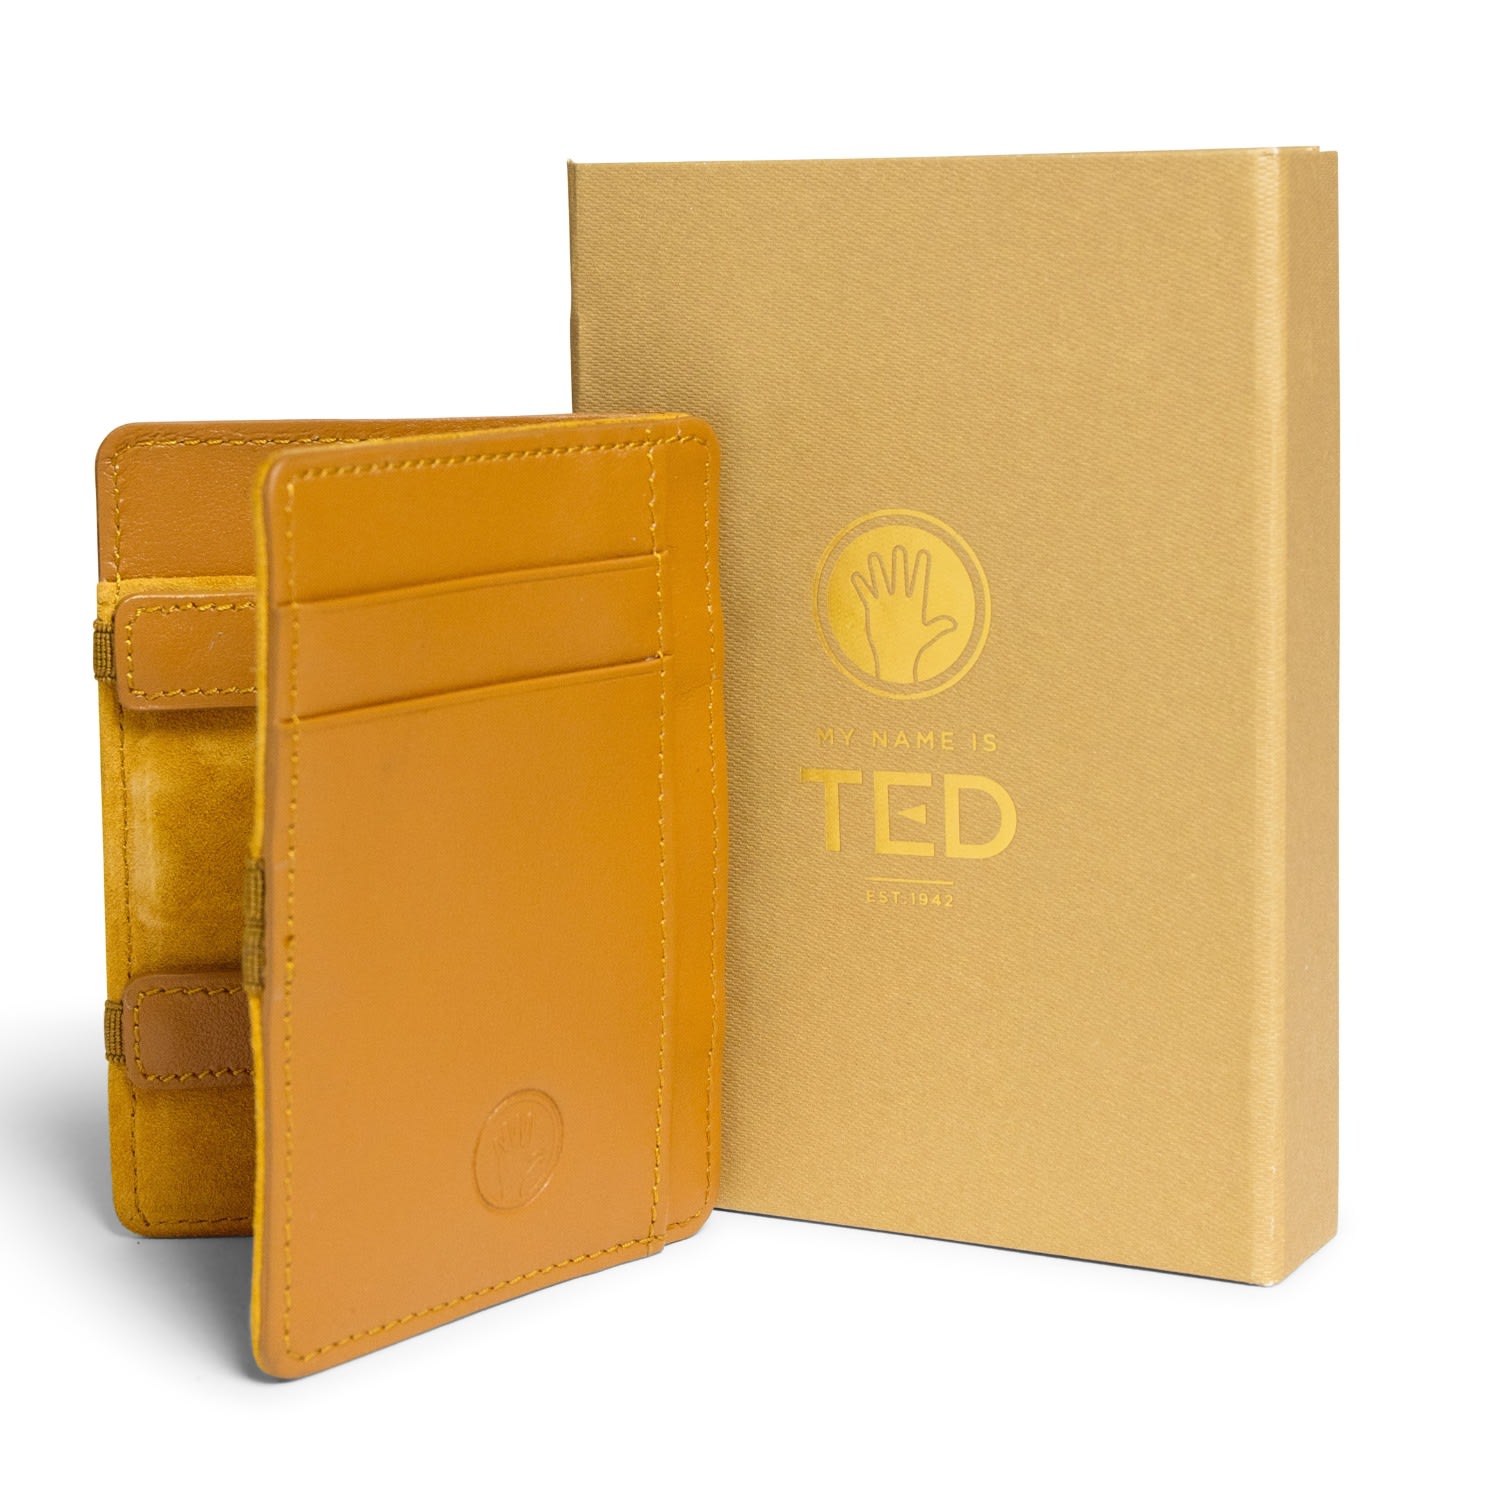 My Name Is TED Men's Non-Toxic Dyes Black Leather Magic Wallet Tuscan Tan With Luxury Suede My Name Is TED